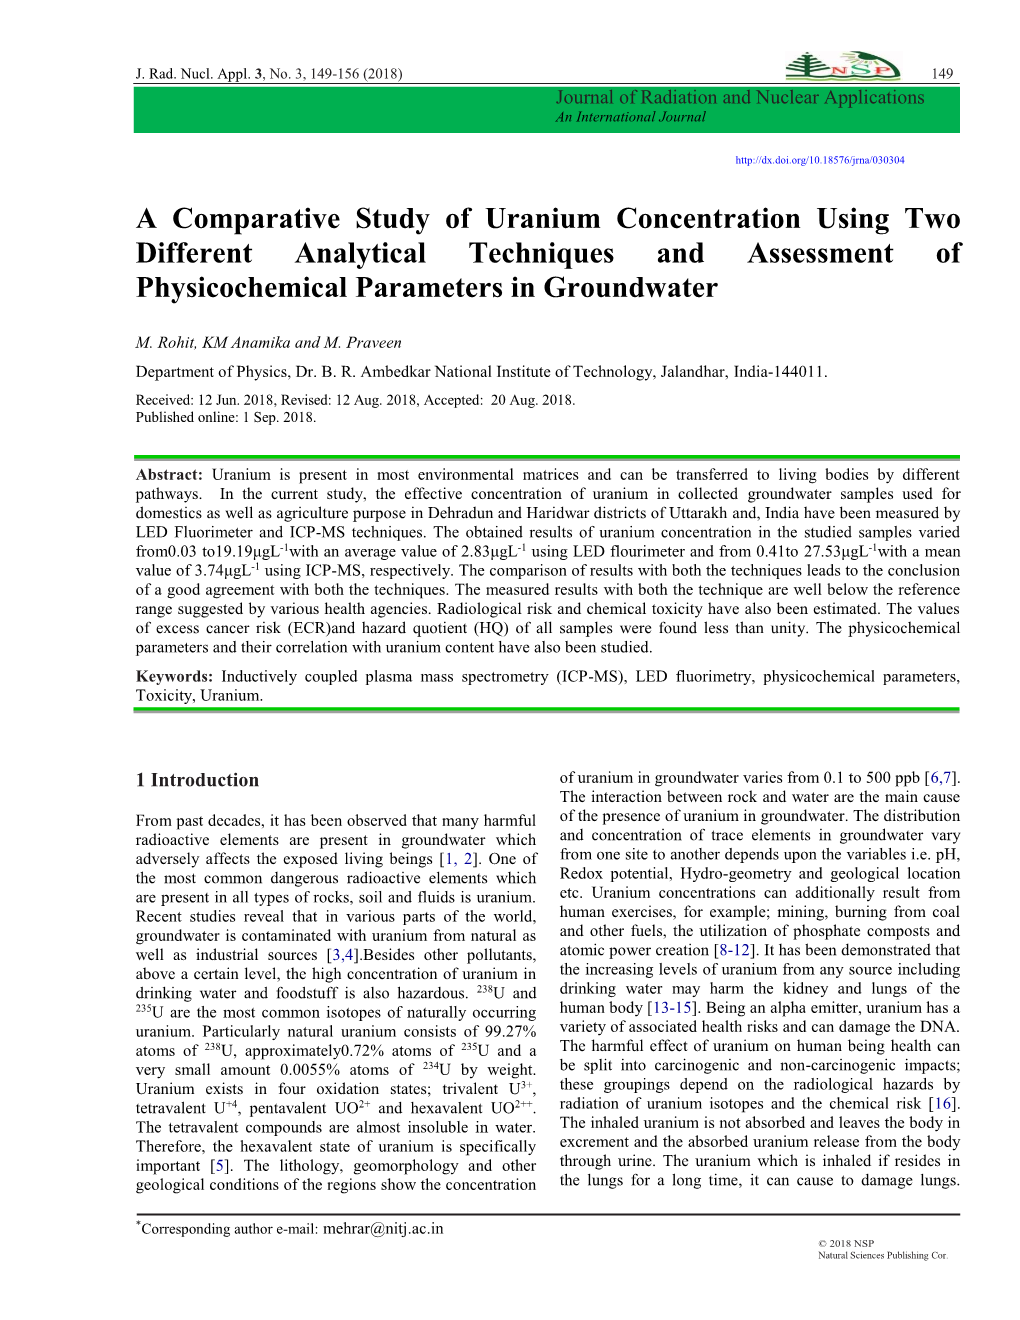 A Comparative Study of Uranium Concentration Using Two Different Analytical Techniques and Assessment of Physicochemical Parameters in Groundwater